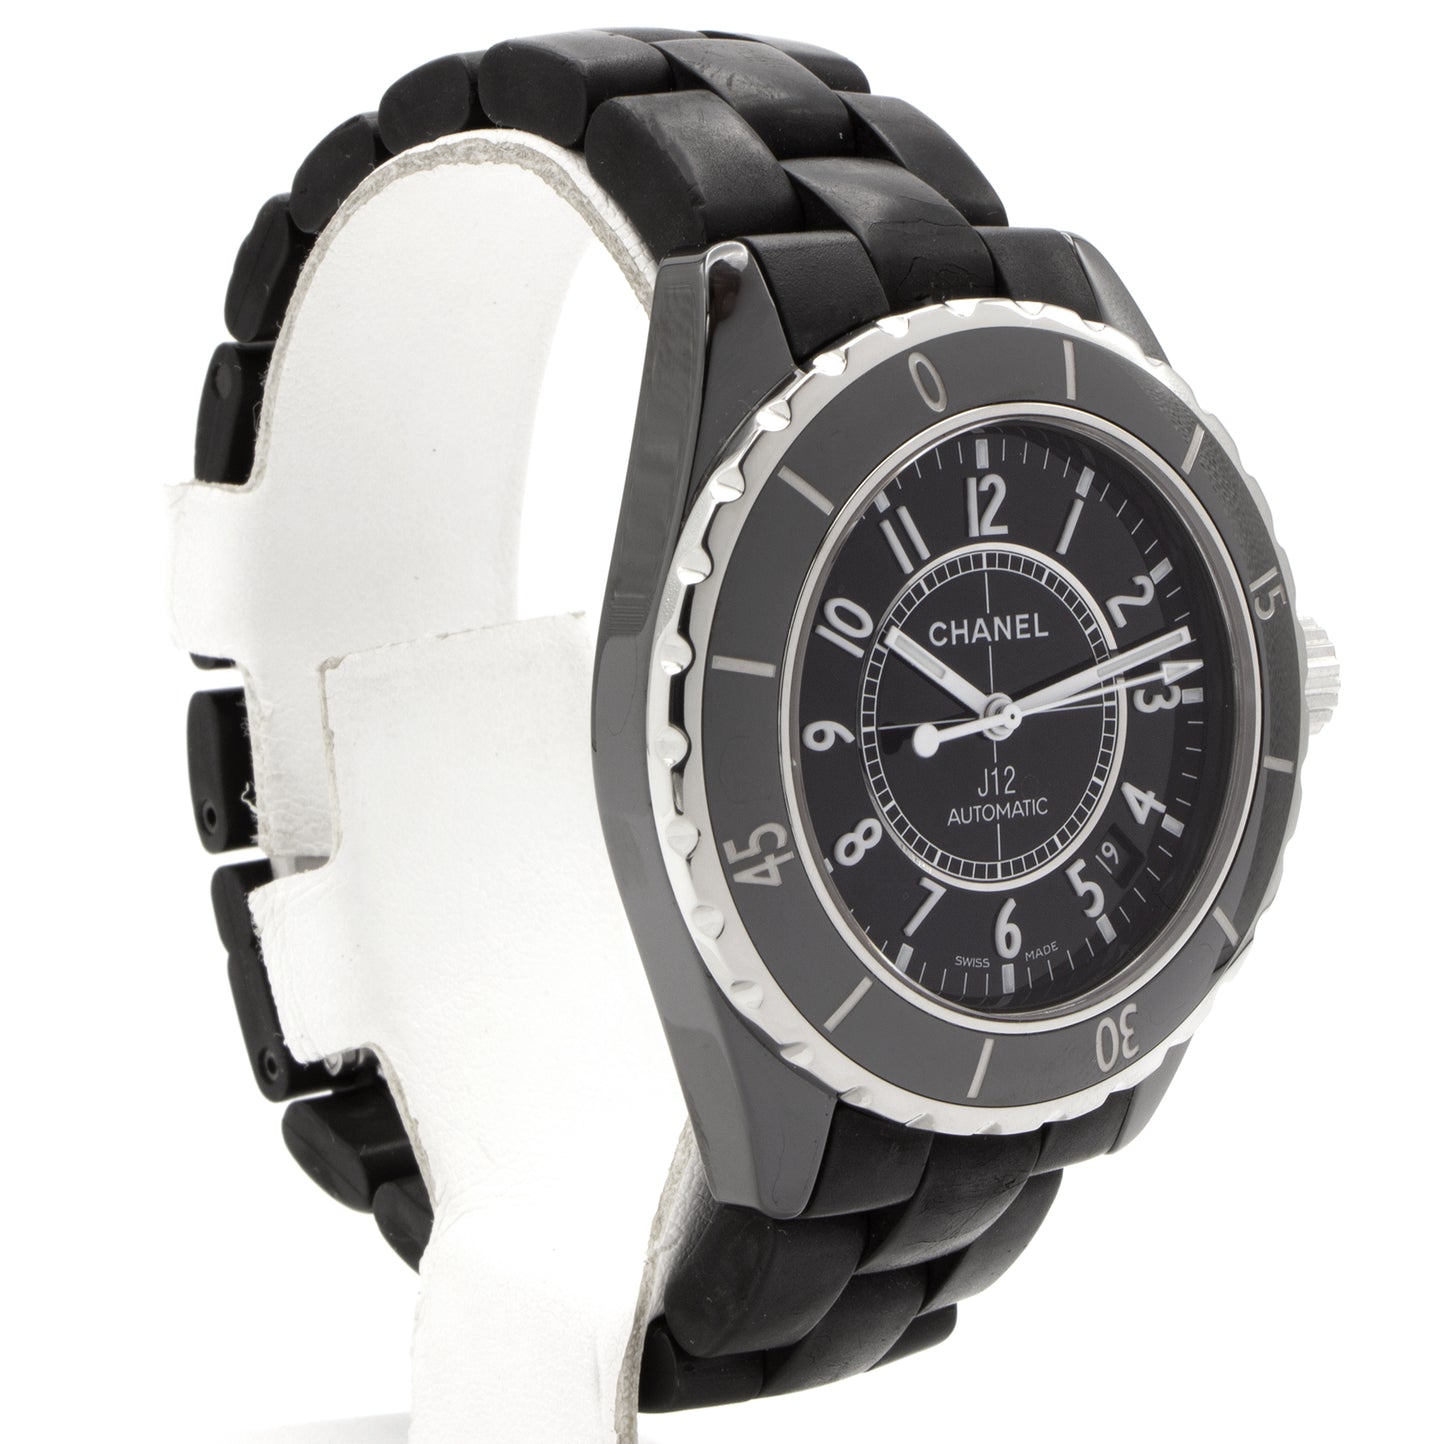 Chanel J12 Automatic 39mm watch